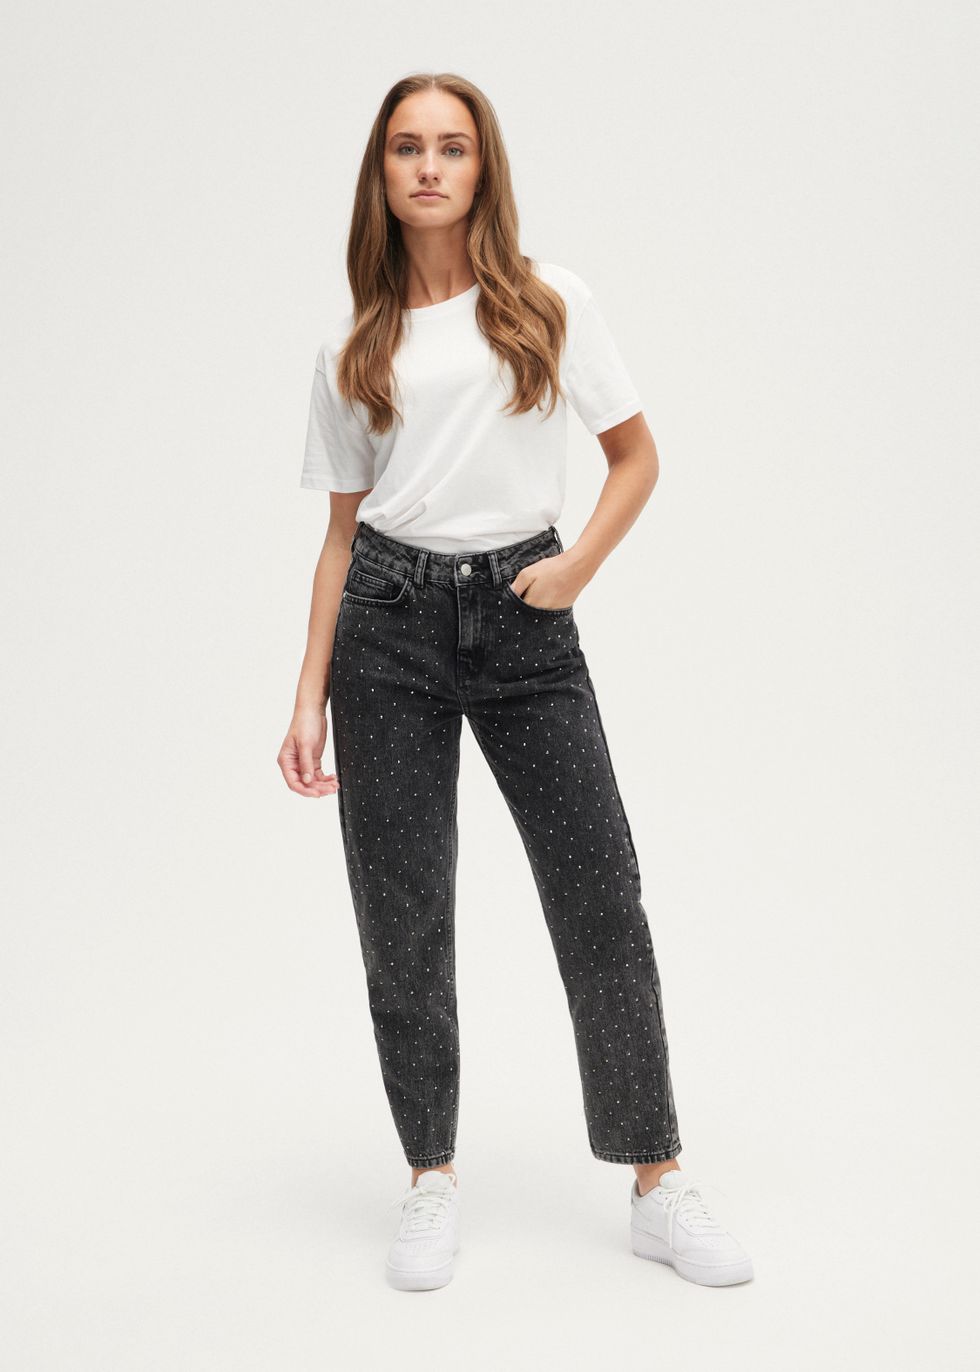 The Sting Webshop Glitter High Jeans